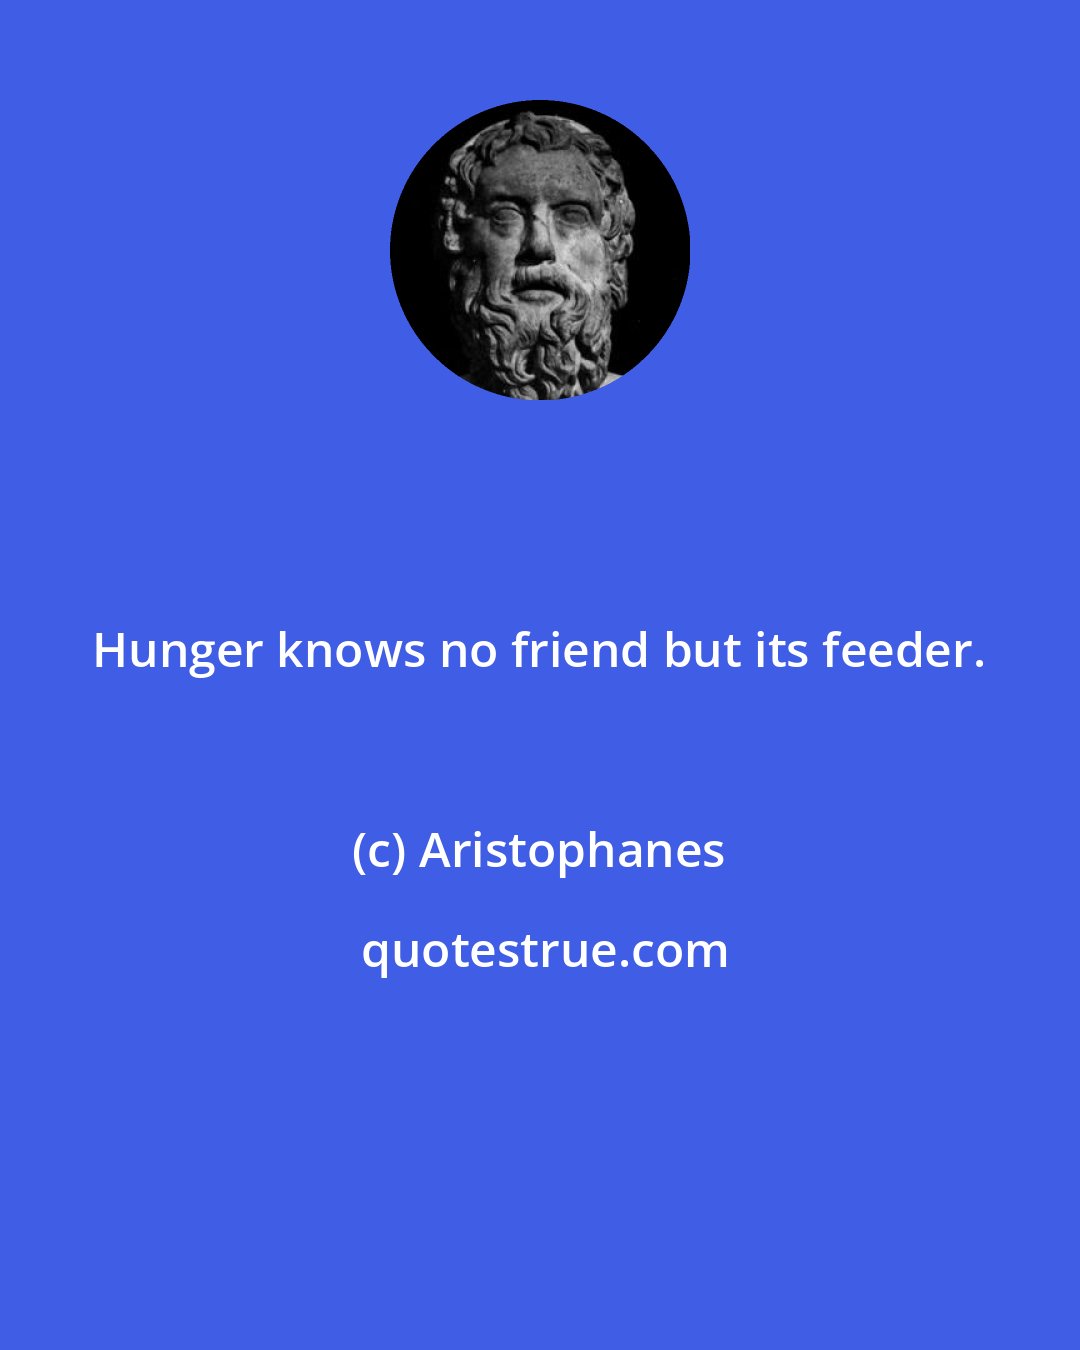 Aristophanes: Hunger knows no friend but its feeder.